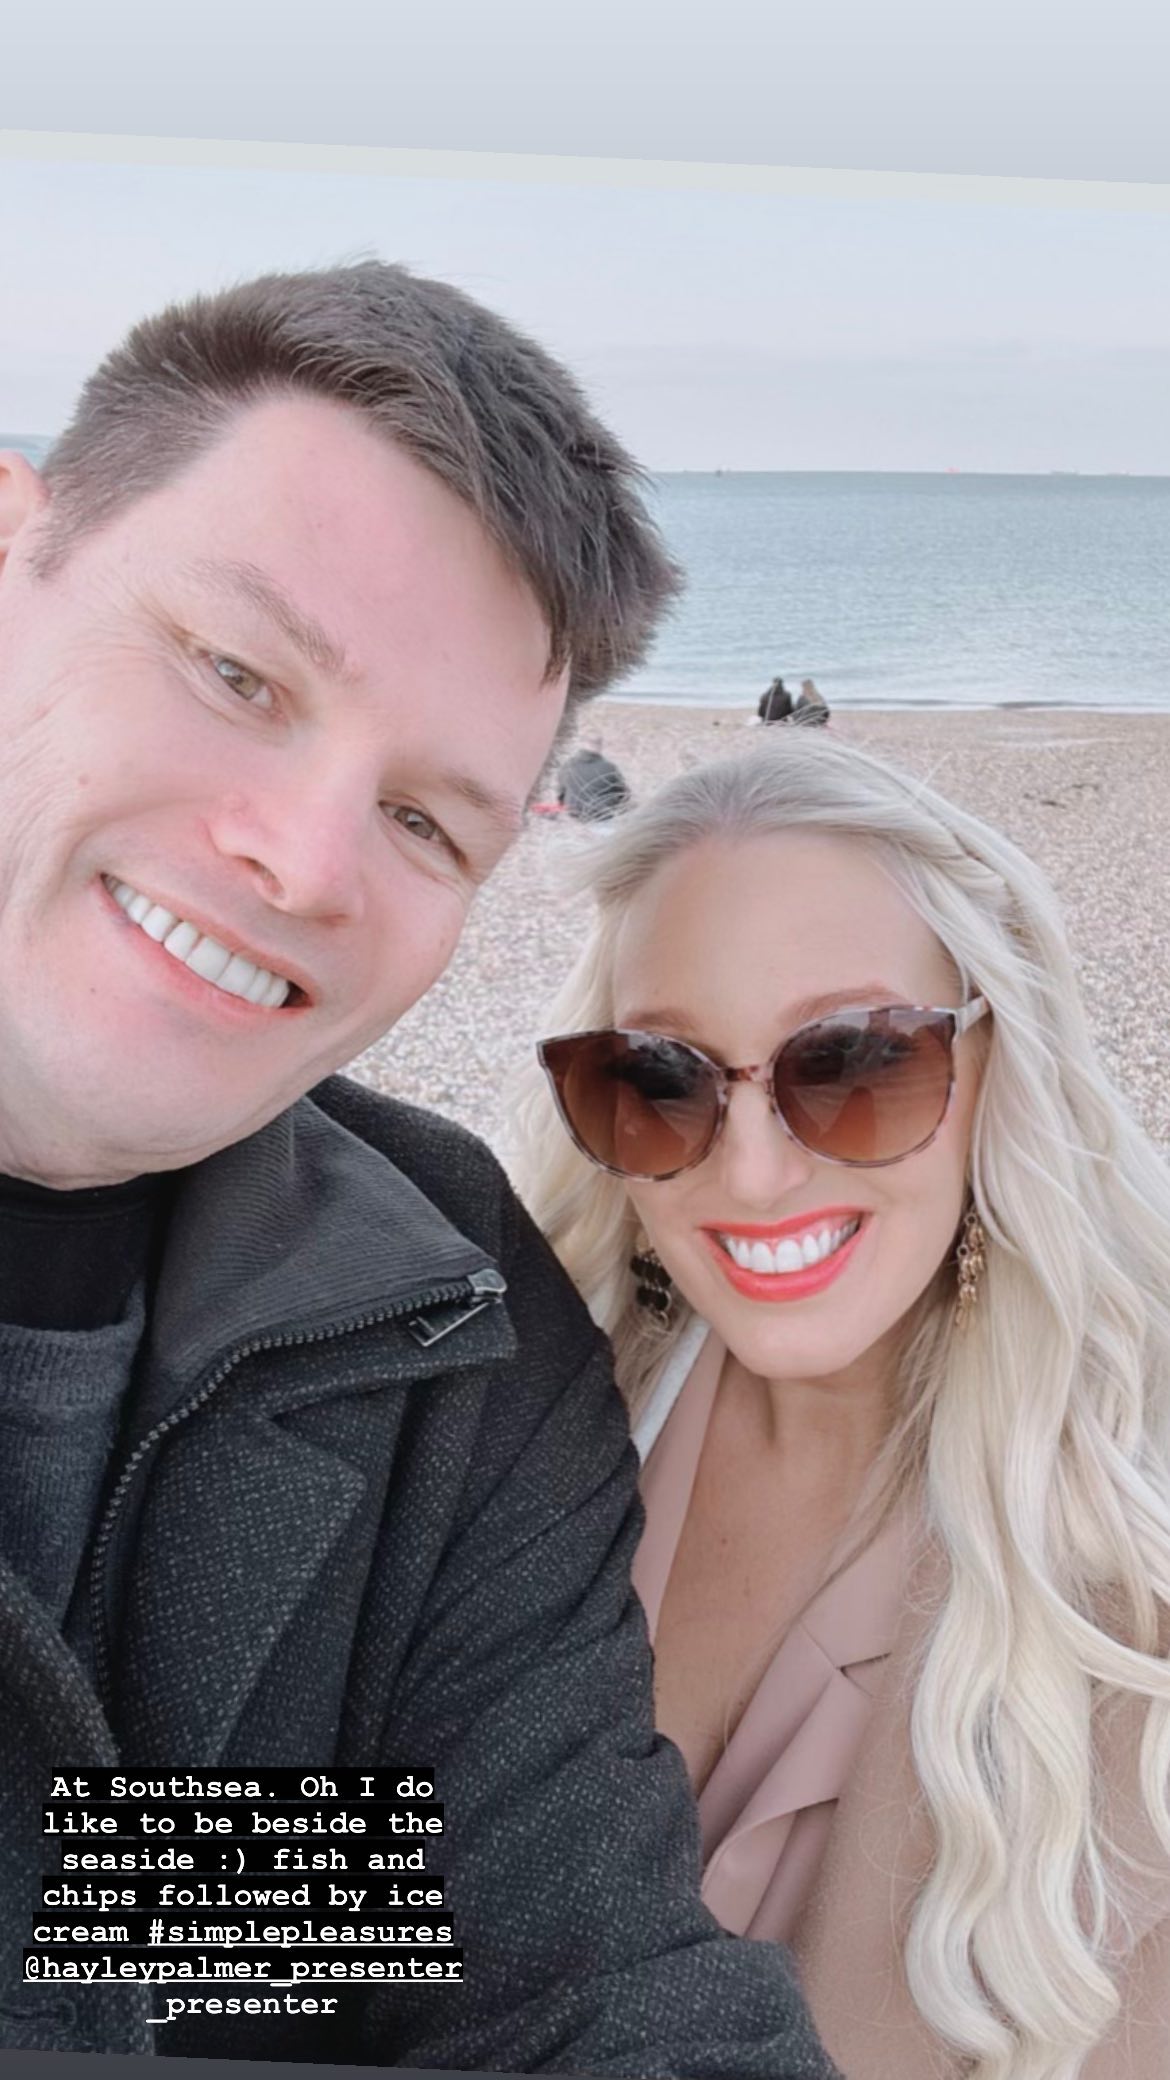 The Chase’s Mark Labbett takes huge new step in romance with TV presenter girlfriend ahead of his U.S. TV return